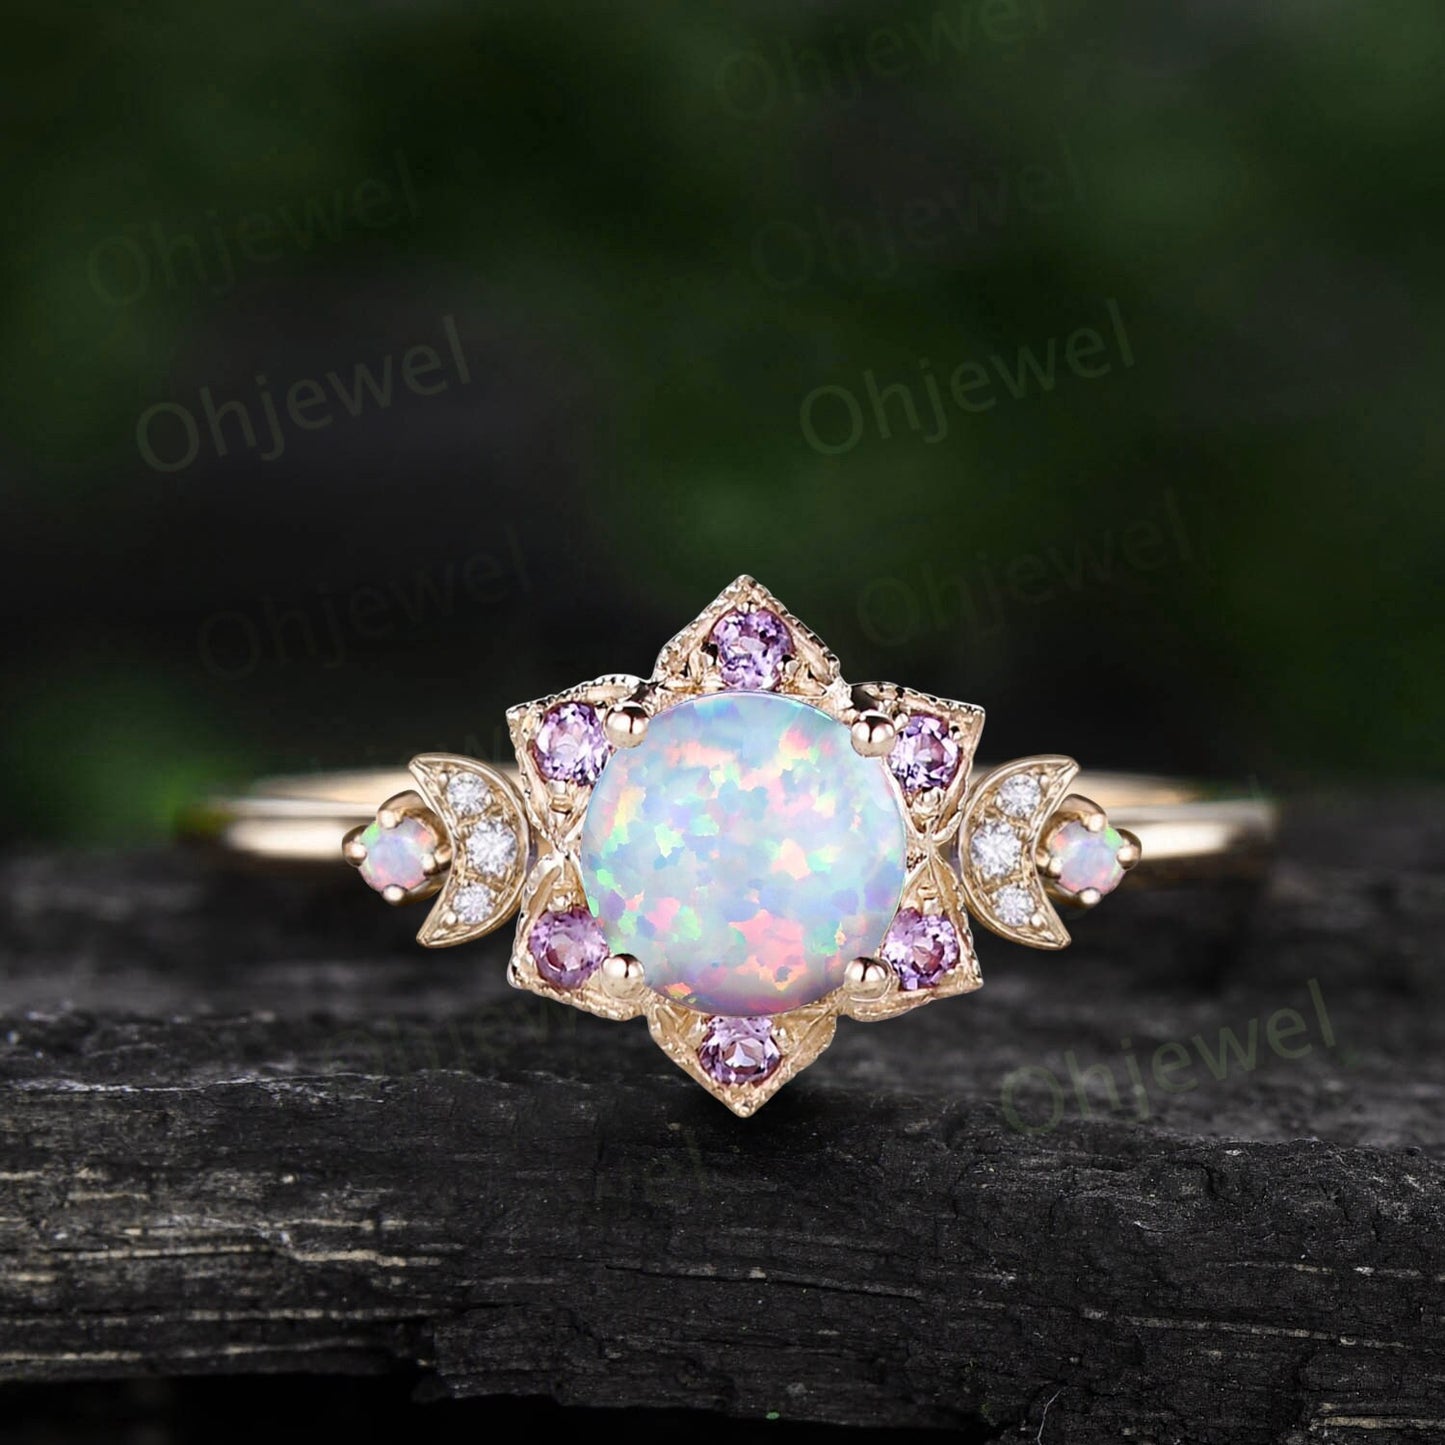 Vintage round white opal engagement ring rose gold milgrain floral moon amethyst diamond ring women unique wedding anniversary ring gift